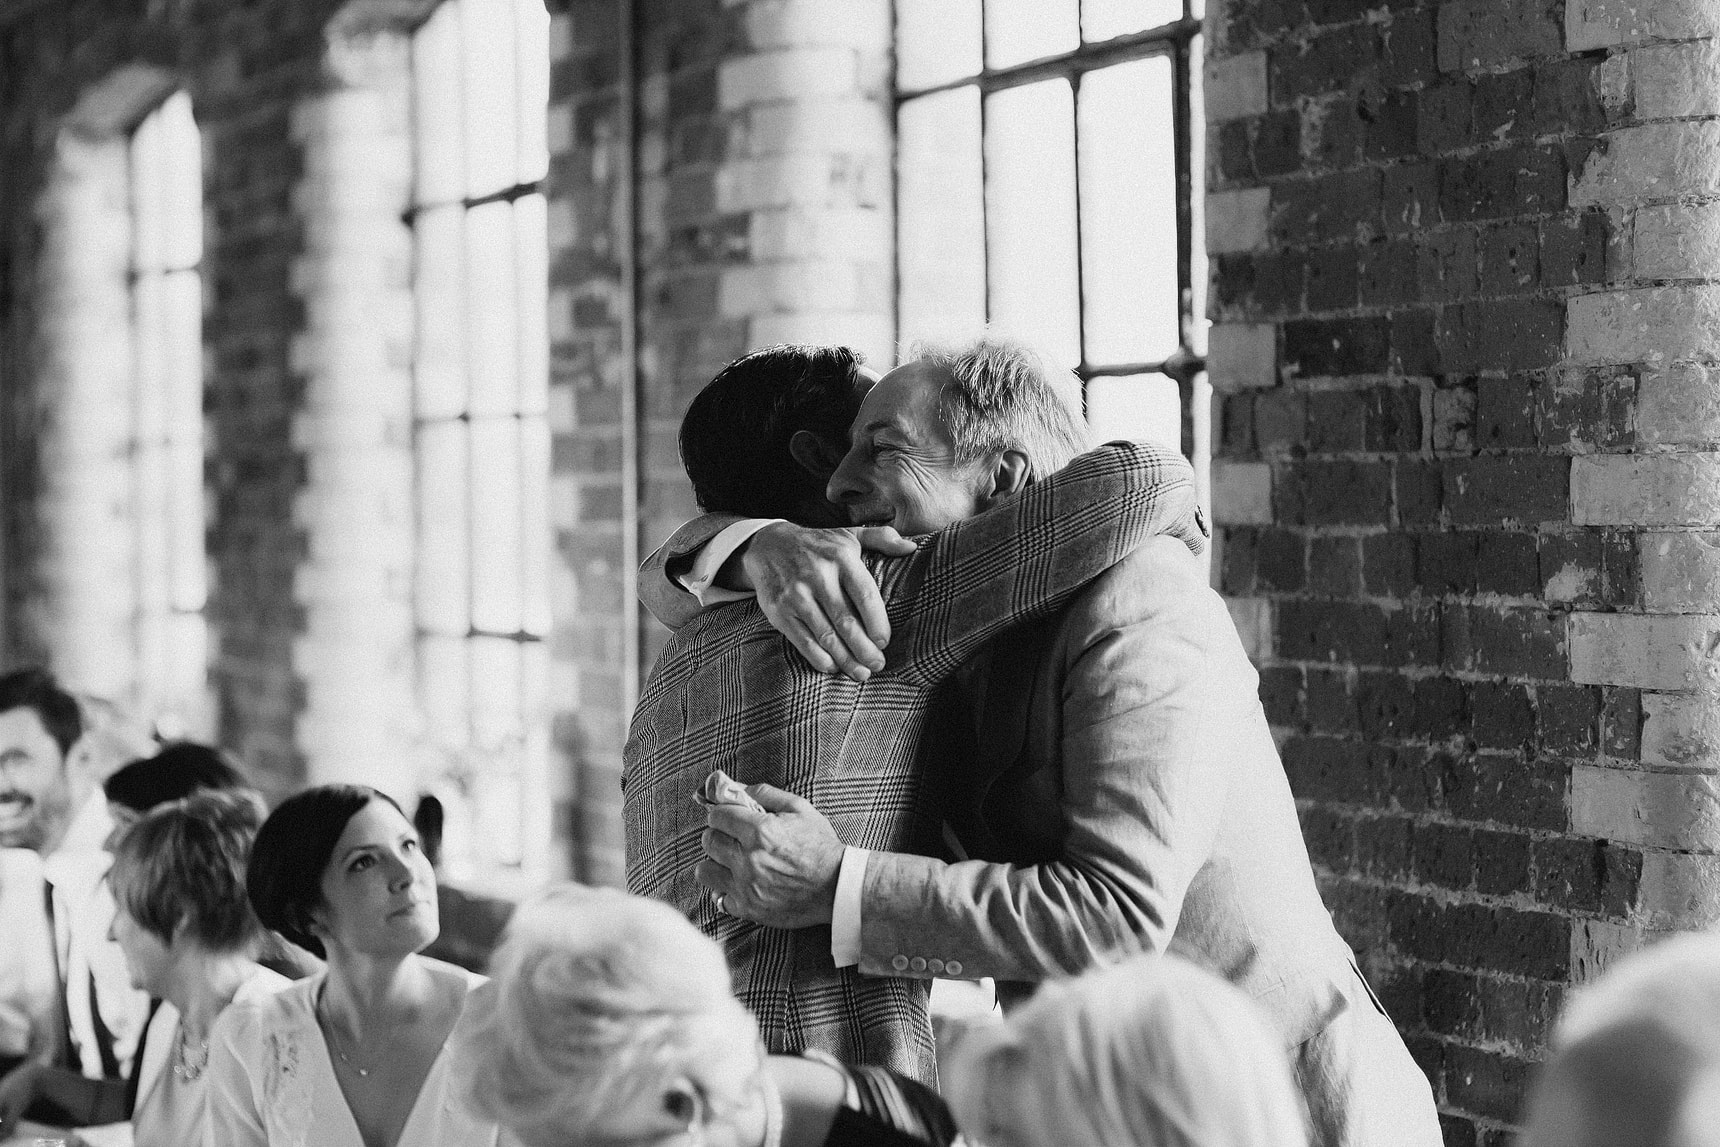 bride hugging her father